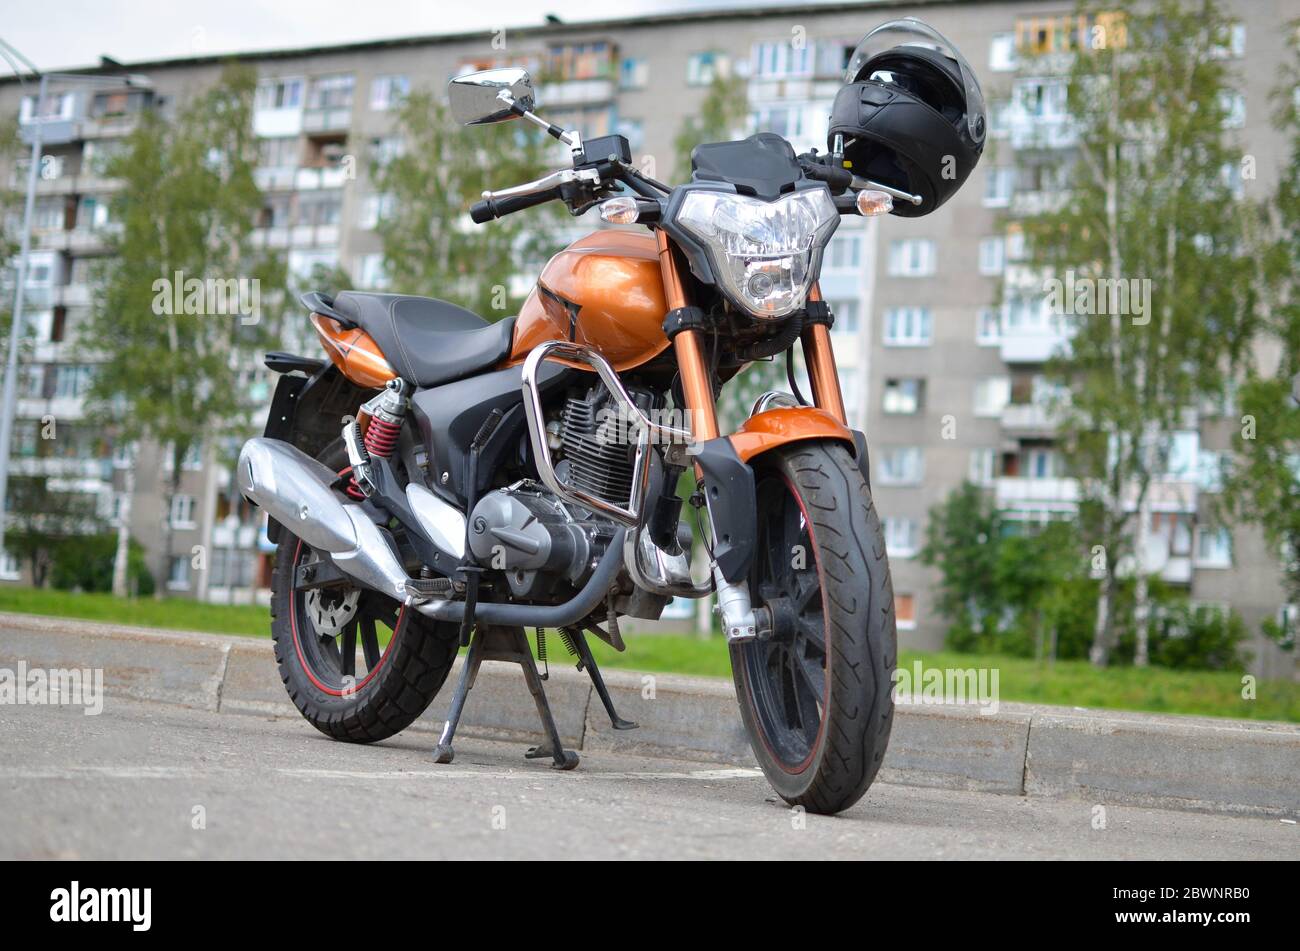 Orange motorcycle with black helmet parked on a summer day. Stock Photo